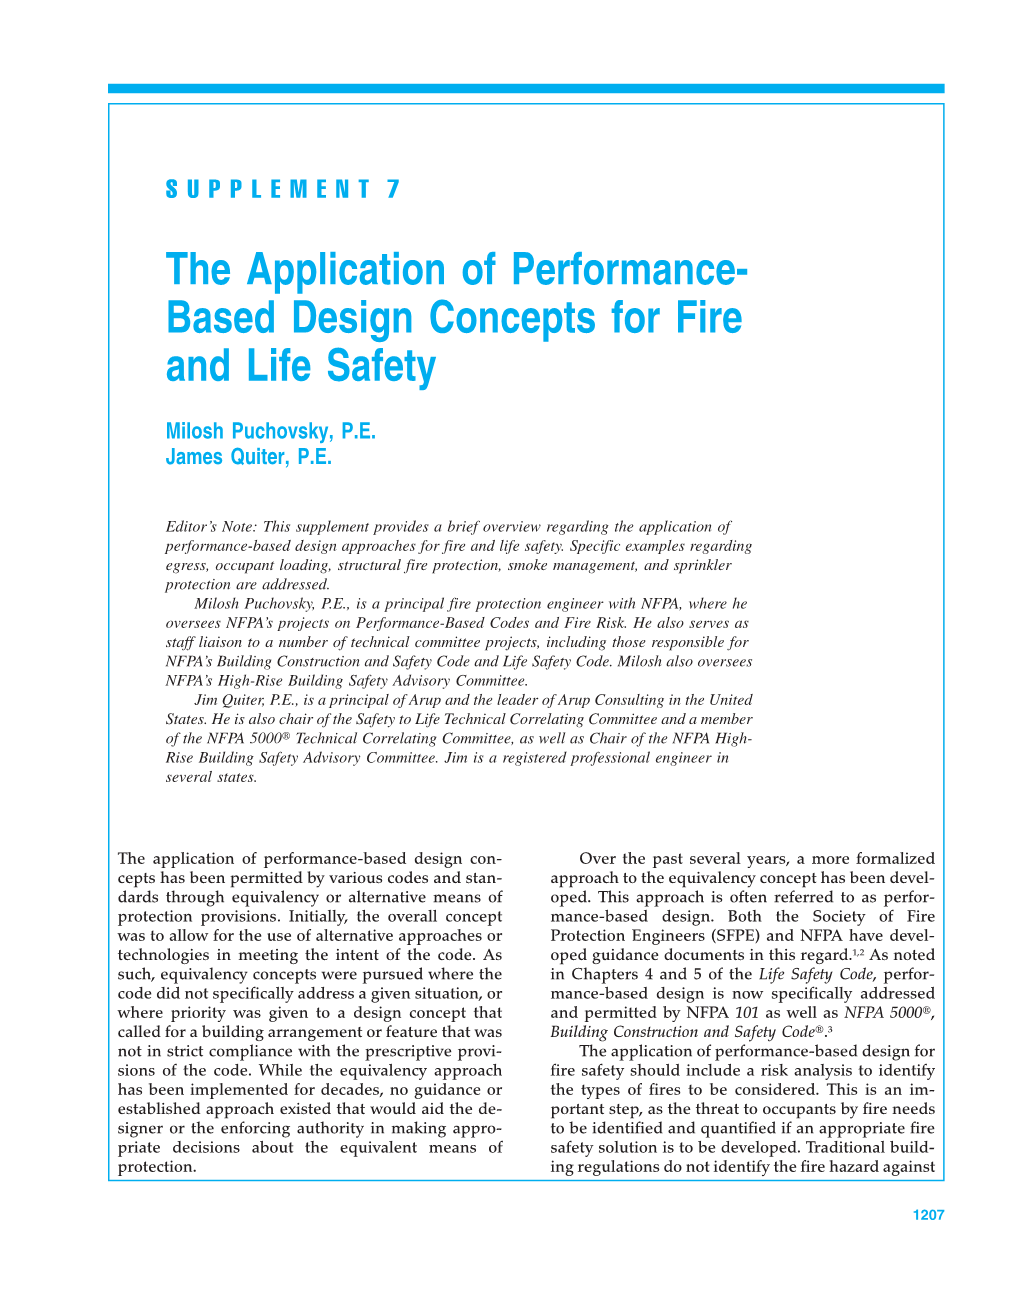 Based Design Concepts for Fire and Life Safety